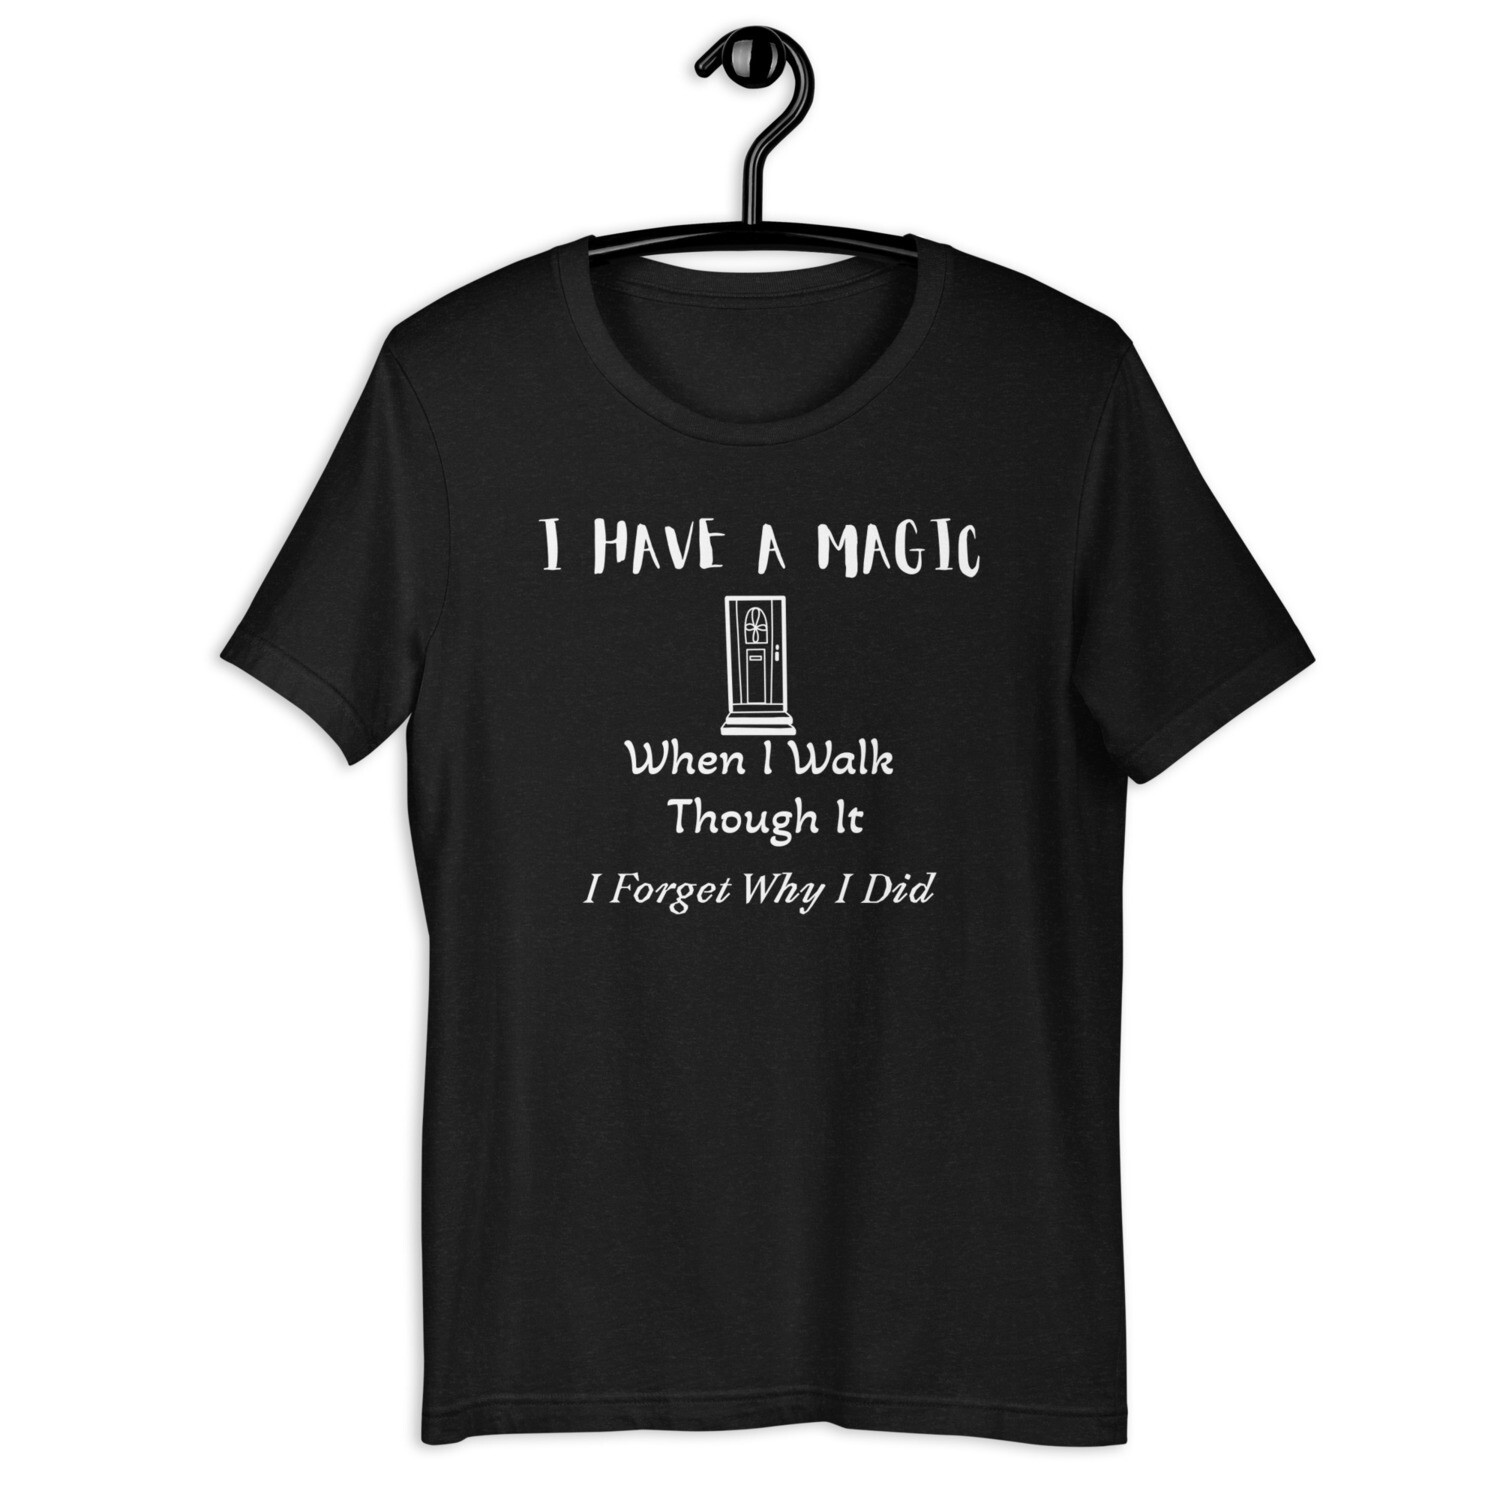 "I have a Magic door, when I walk though it, I forget why I did" Unisex t-shirt